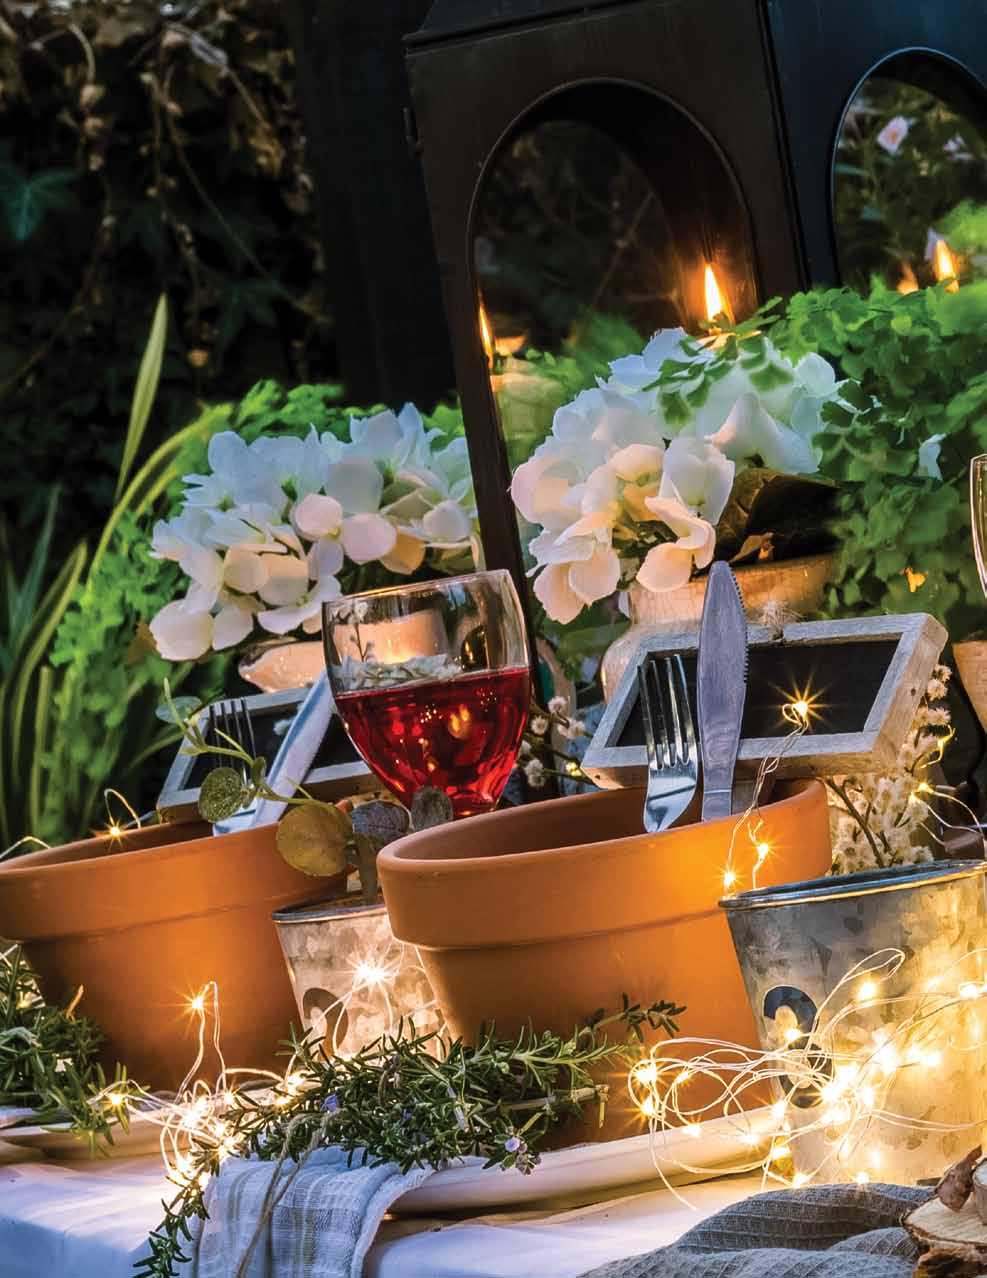 Summer Nights This summer relax and create mood, scent and atmosphere in your own backyard. Romance Set the atmosphere by lighting candles.